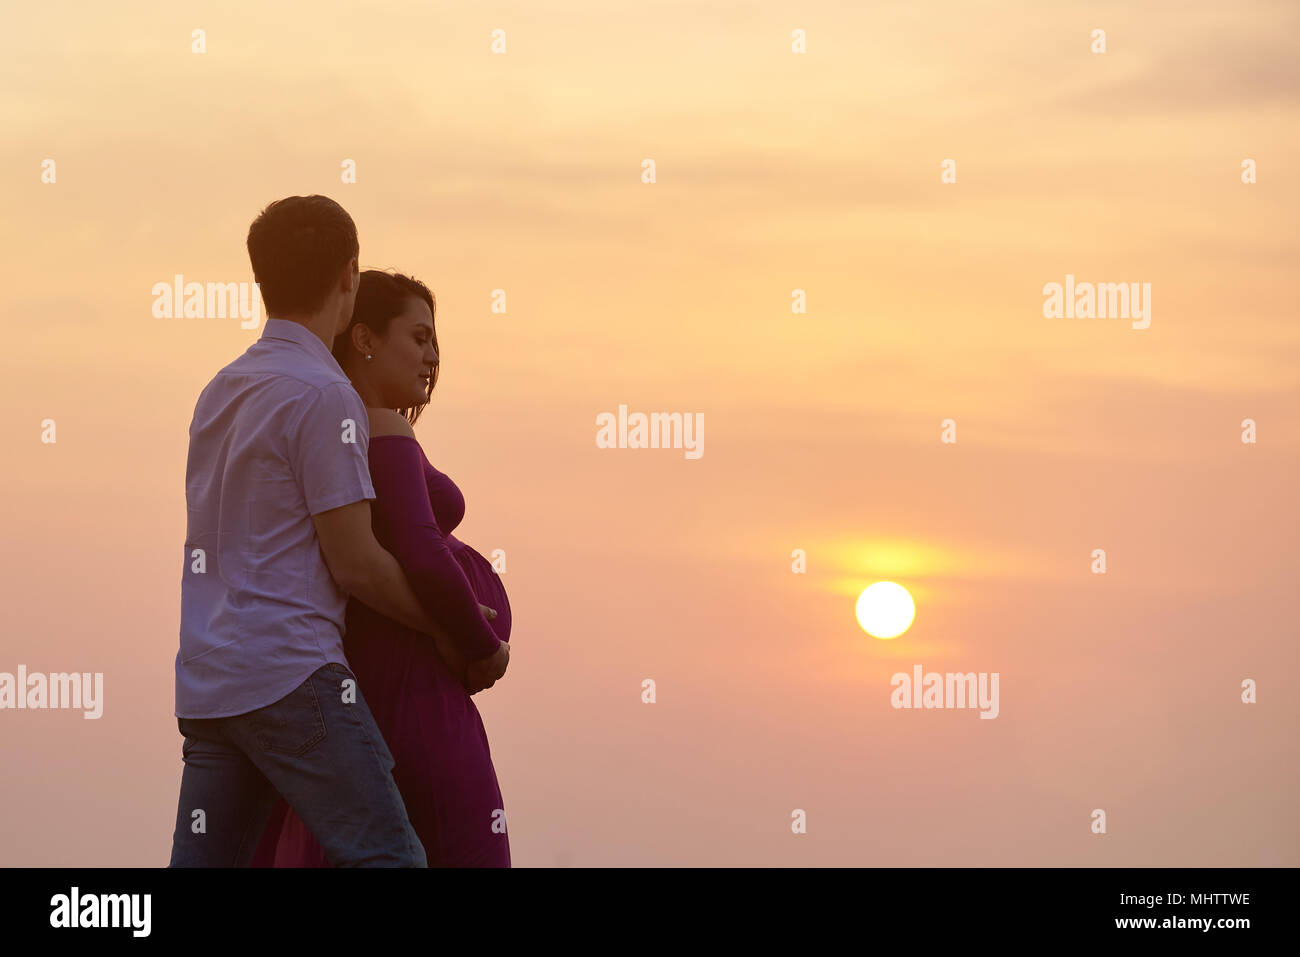 Silhouette of man hugging pregnant woman on sunset background Stock Photo